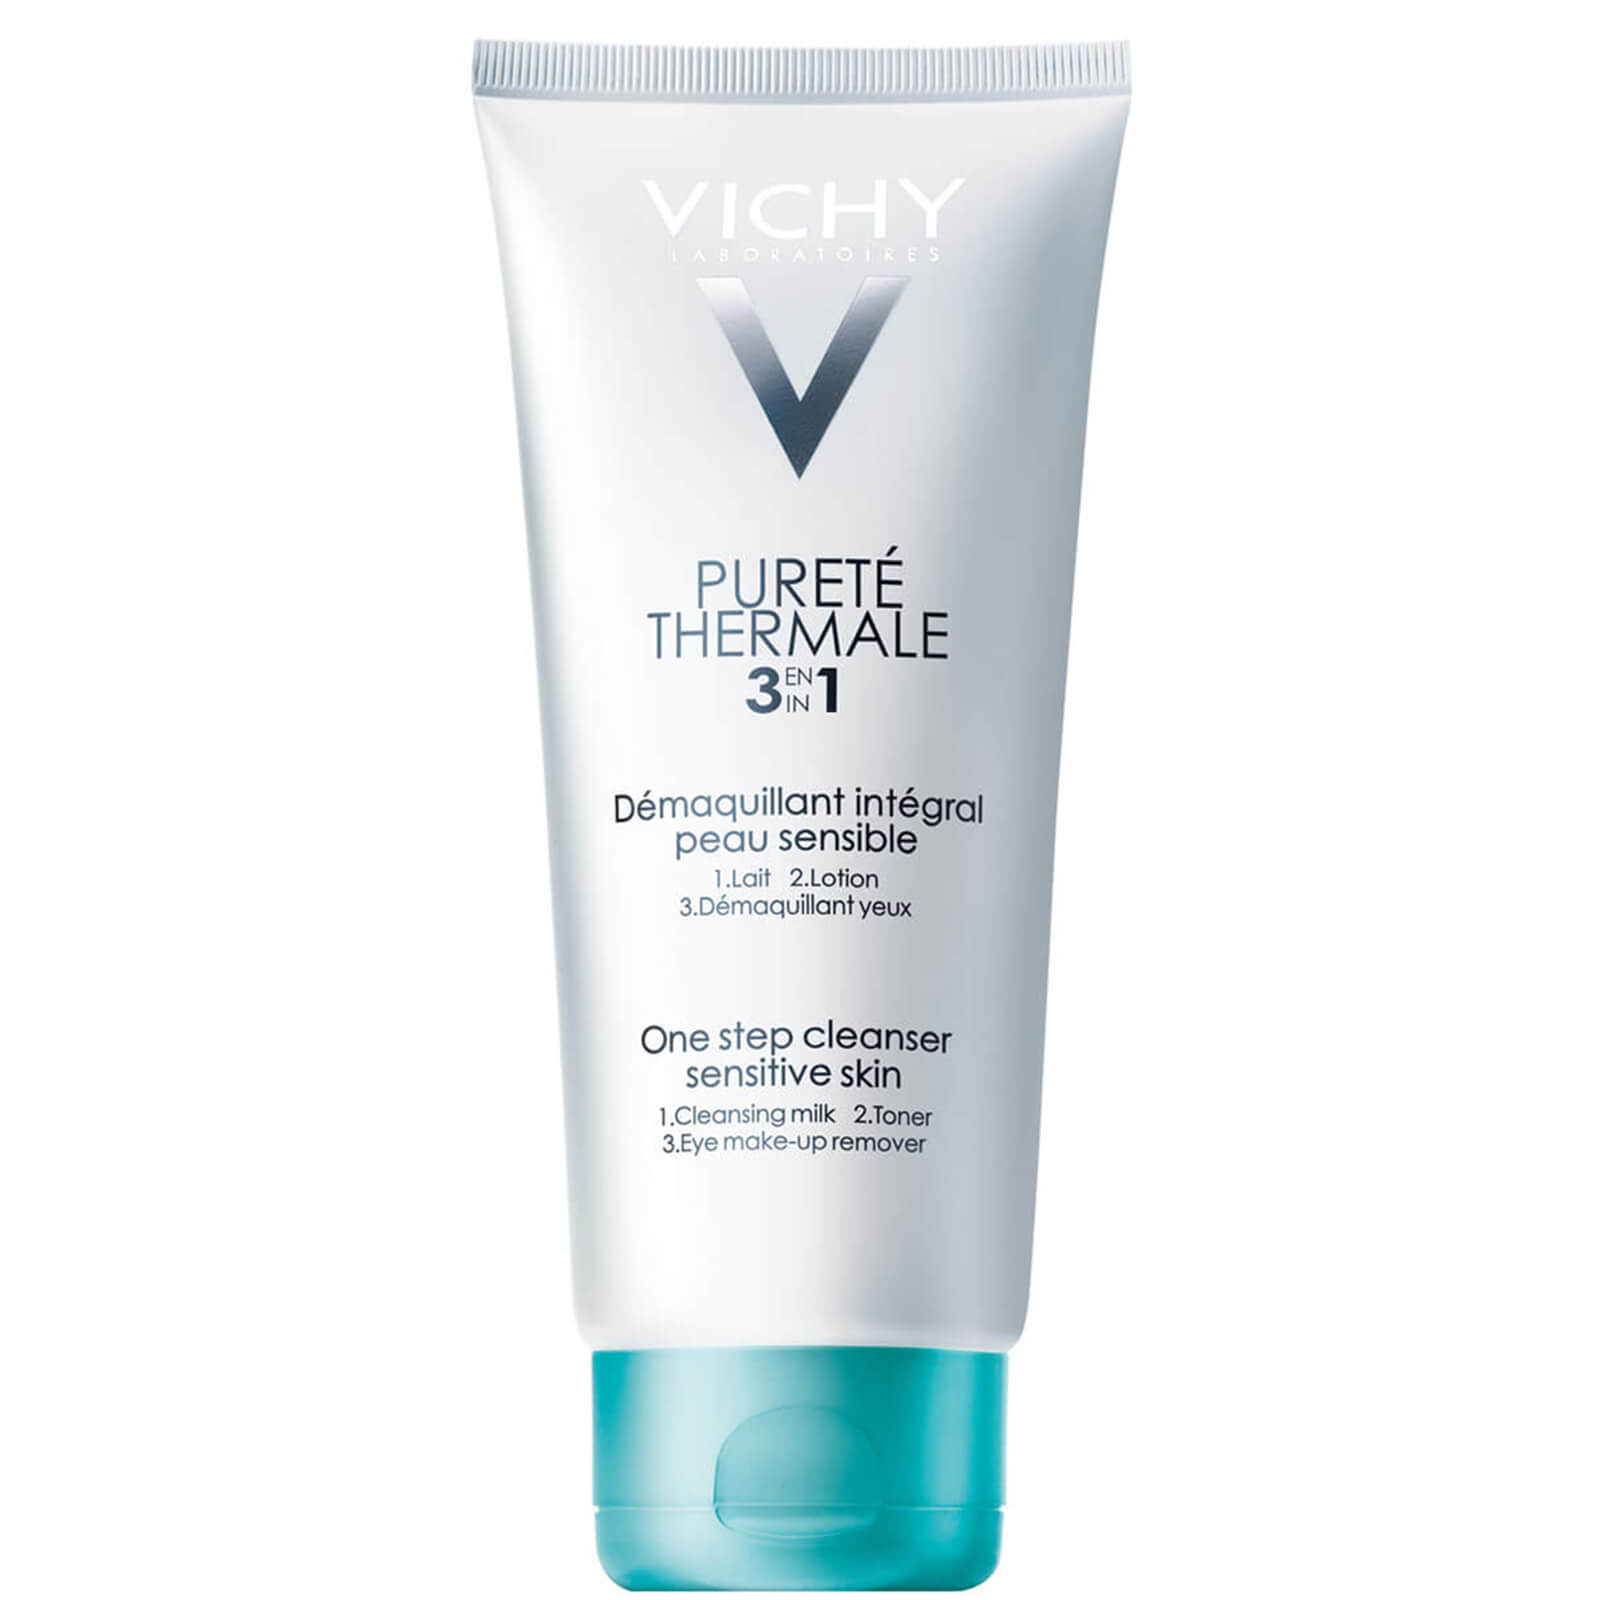 Vichy Pureté Thermale 3-in-1 One Step Facial Cleanser (6.76 Fl. Oz.) In White